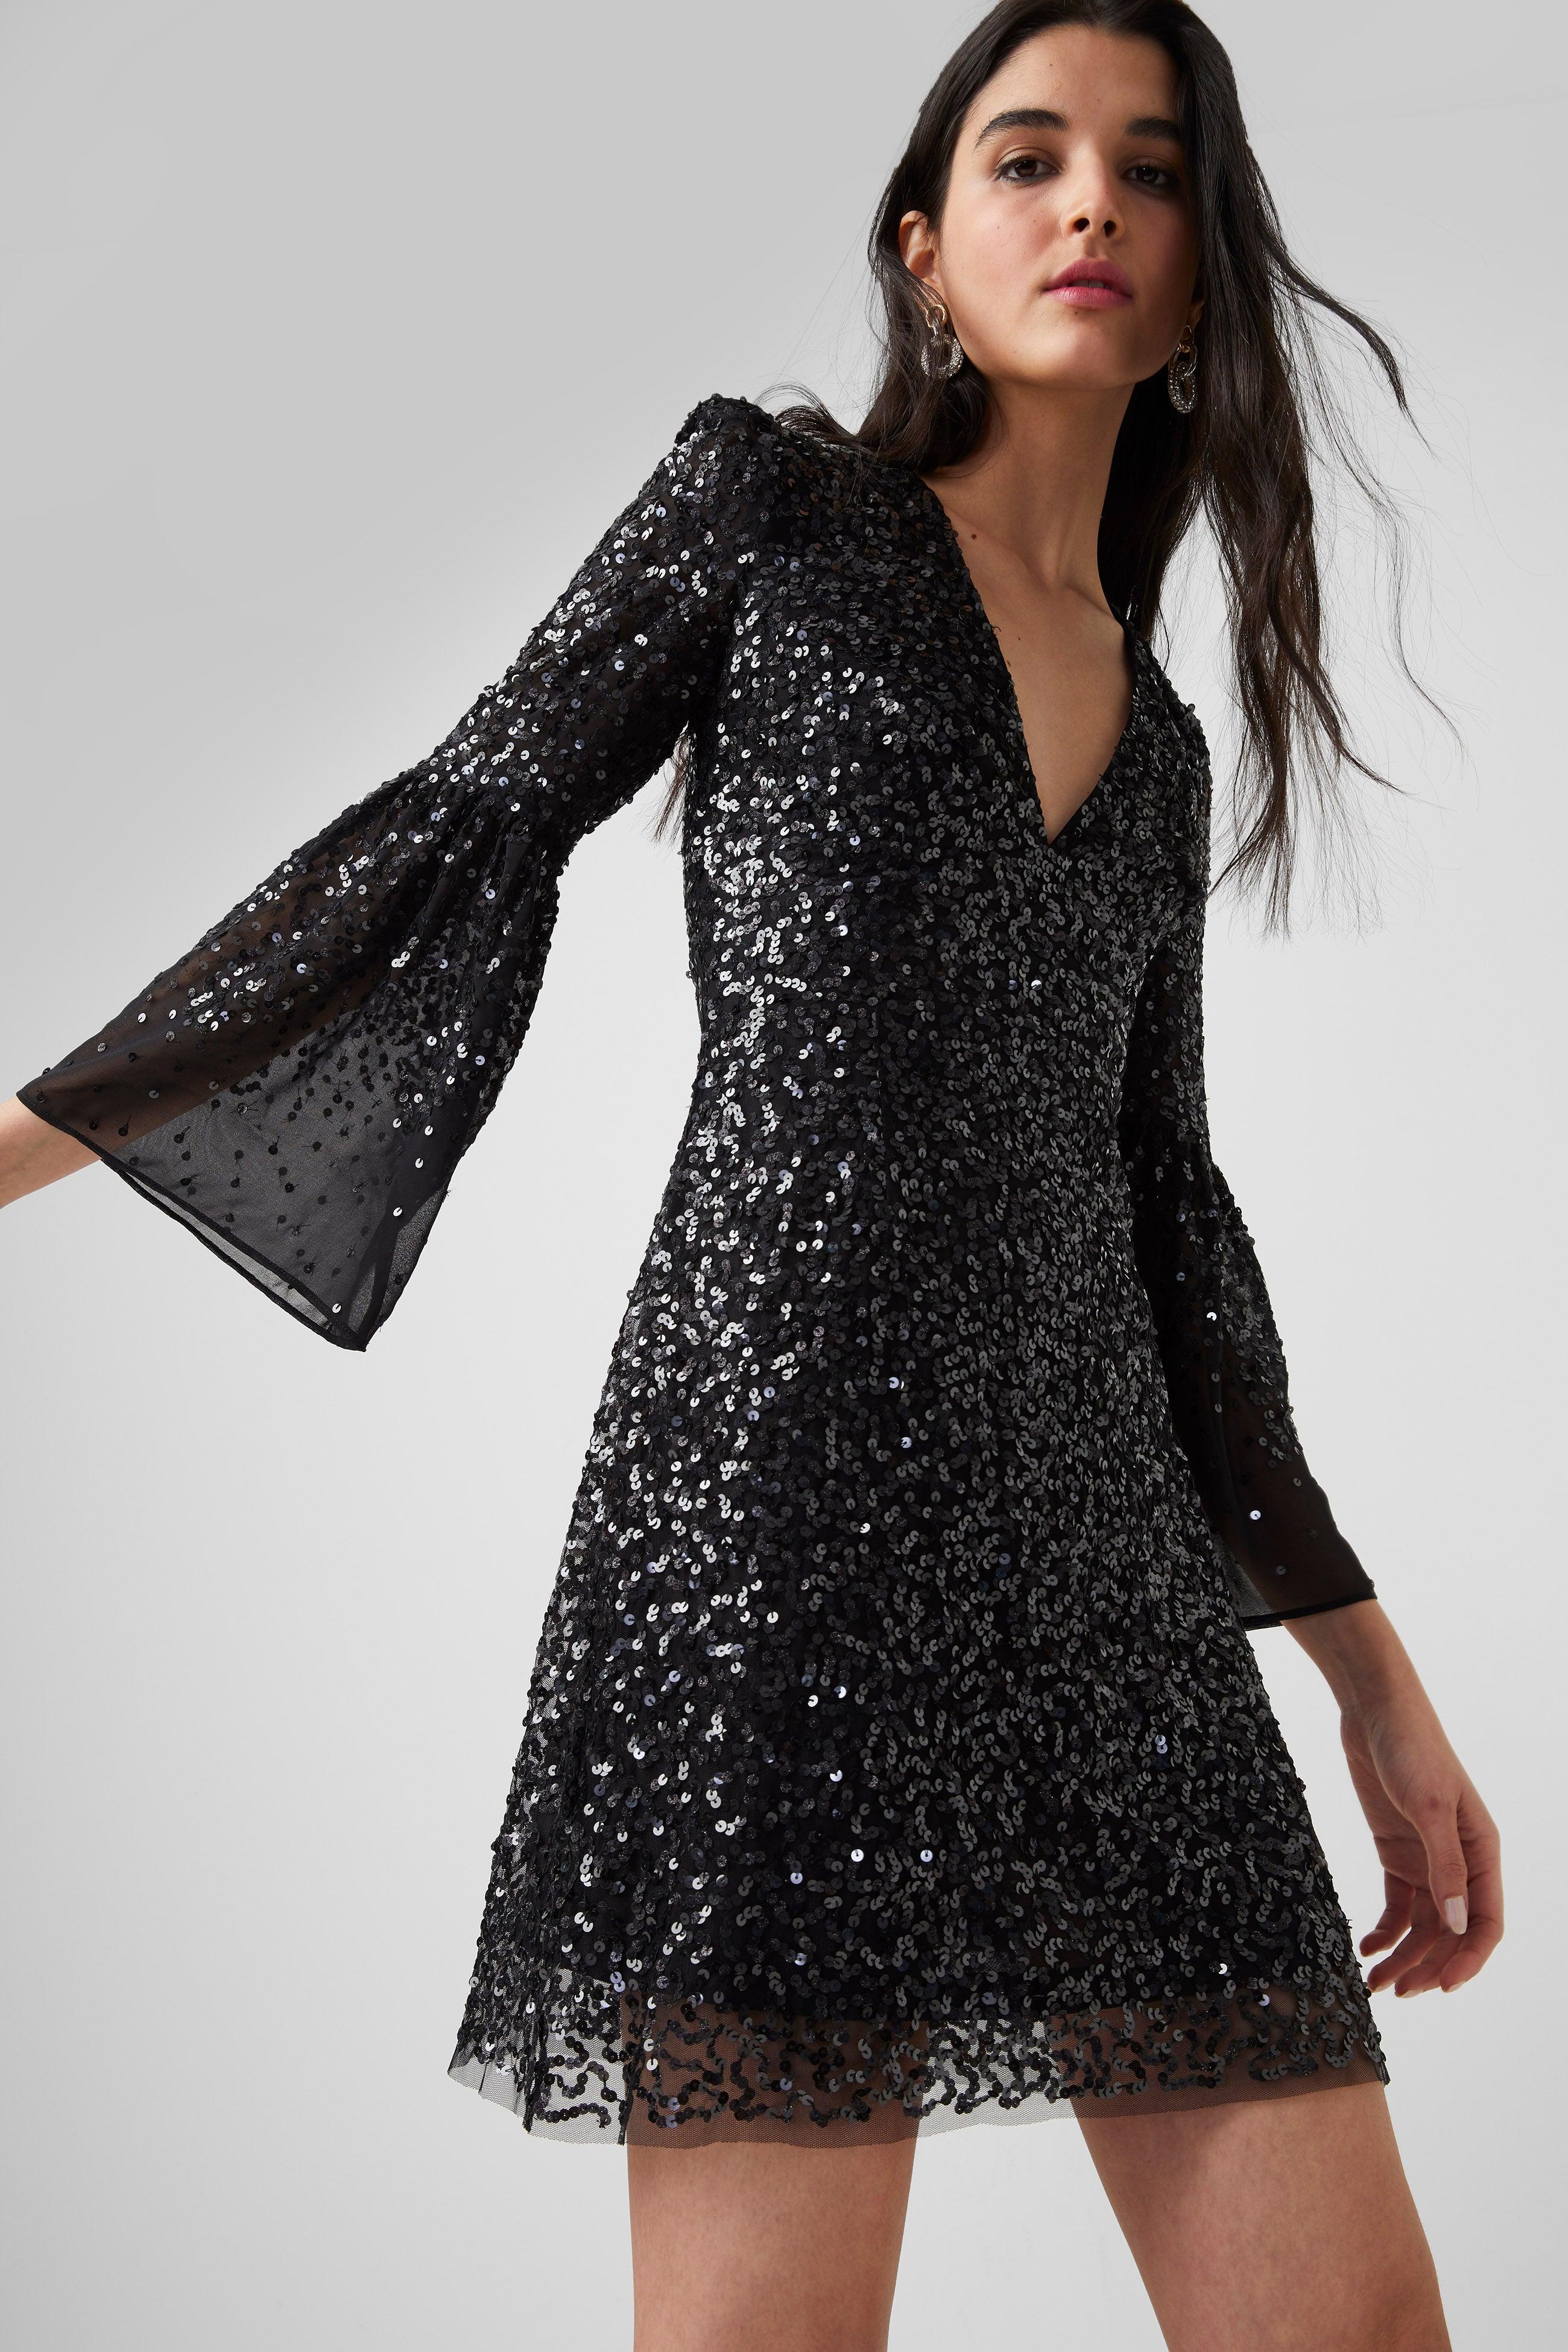 French Connection Cellienne Sequin Long Sleeve Dress in Black | Lyst